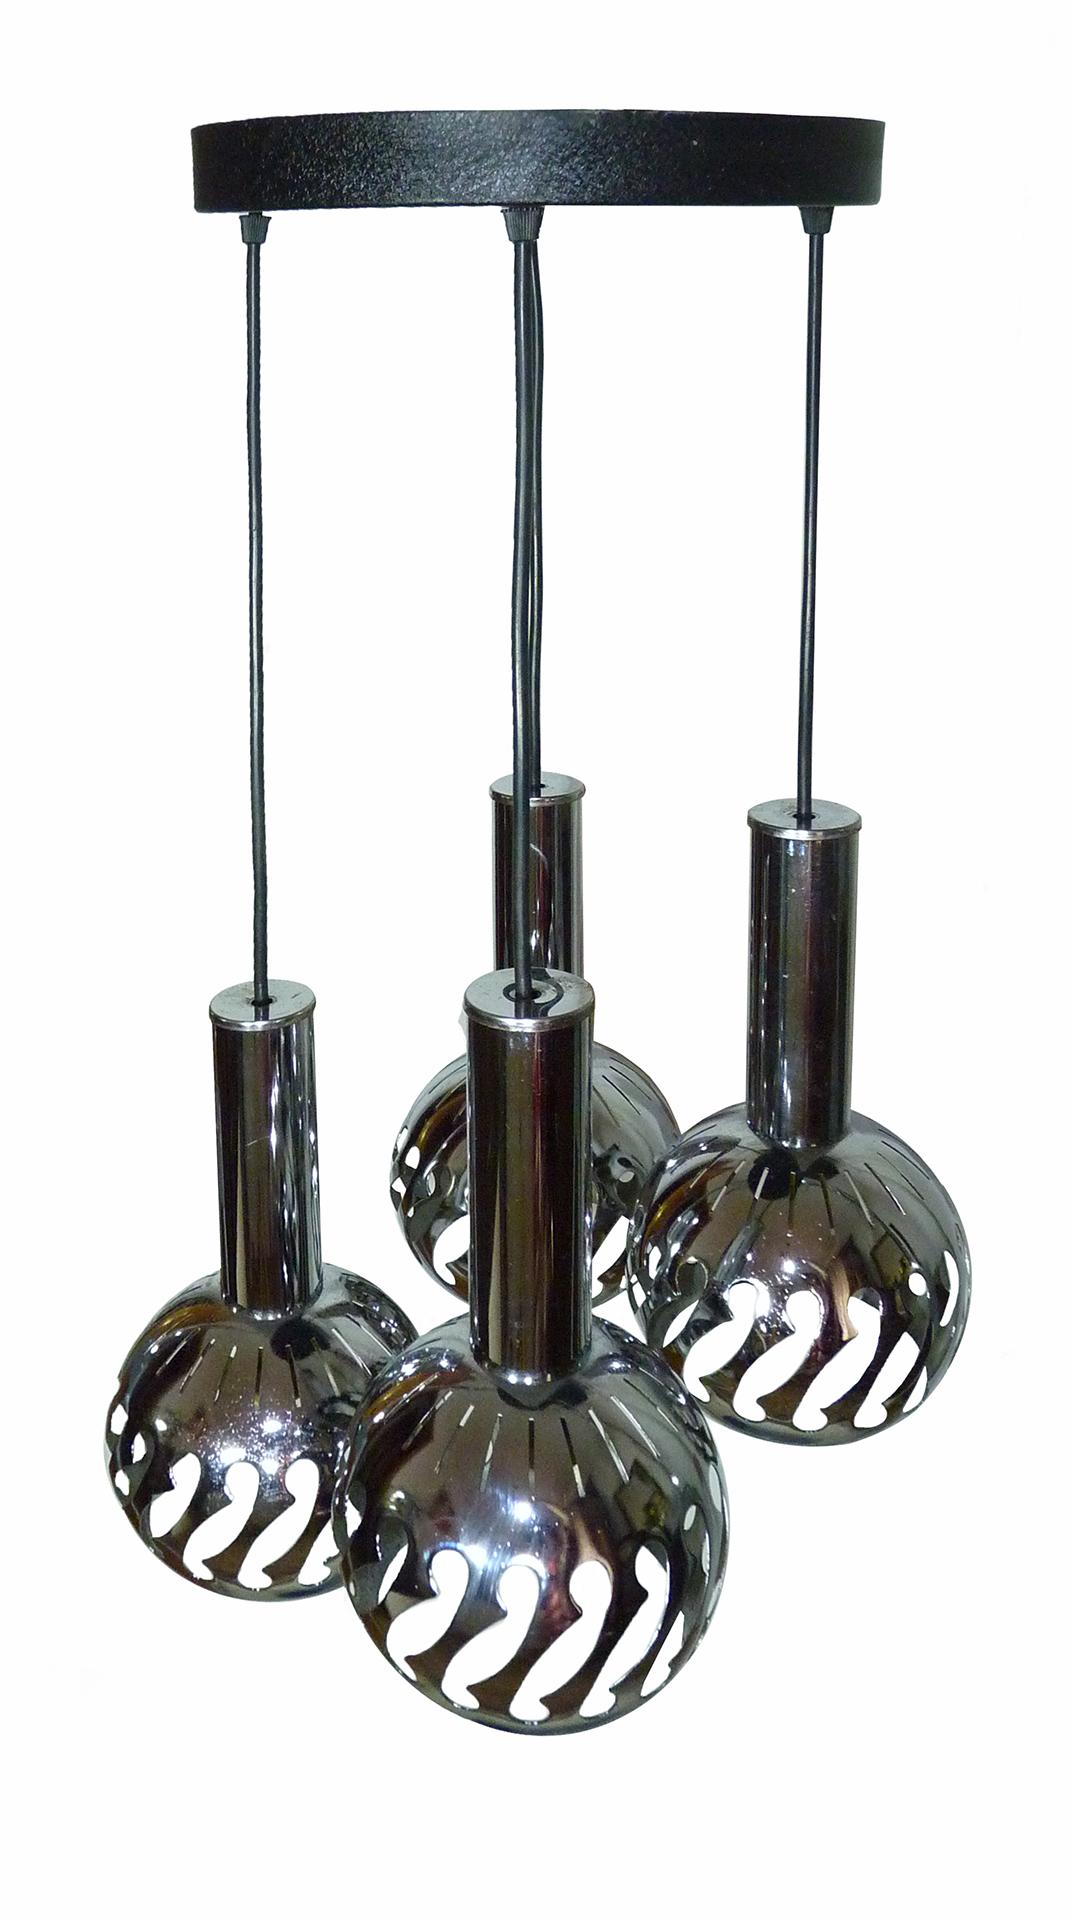 Vintage midcentury 1960s Italian Space Age chrome Cascade 4-light pendant ceiling lamp,
Measures:
Diameter 17.7 in/ 45 cm
Height 30 in/ 75 cm
Weight 5 Kg / 12 lb
4-light bulbs E-27 / good working condition
Assembly required. Bulbs not included.